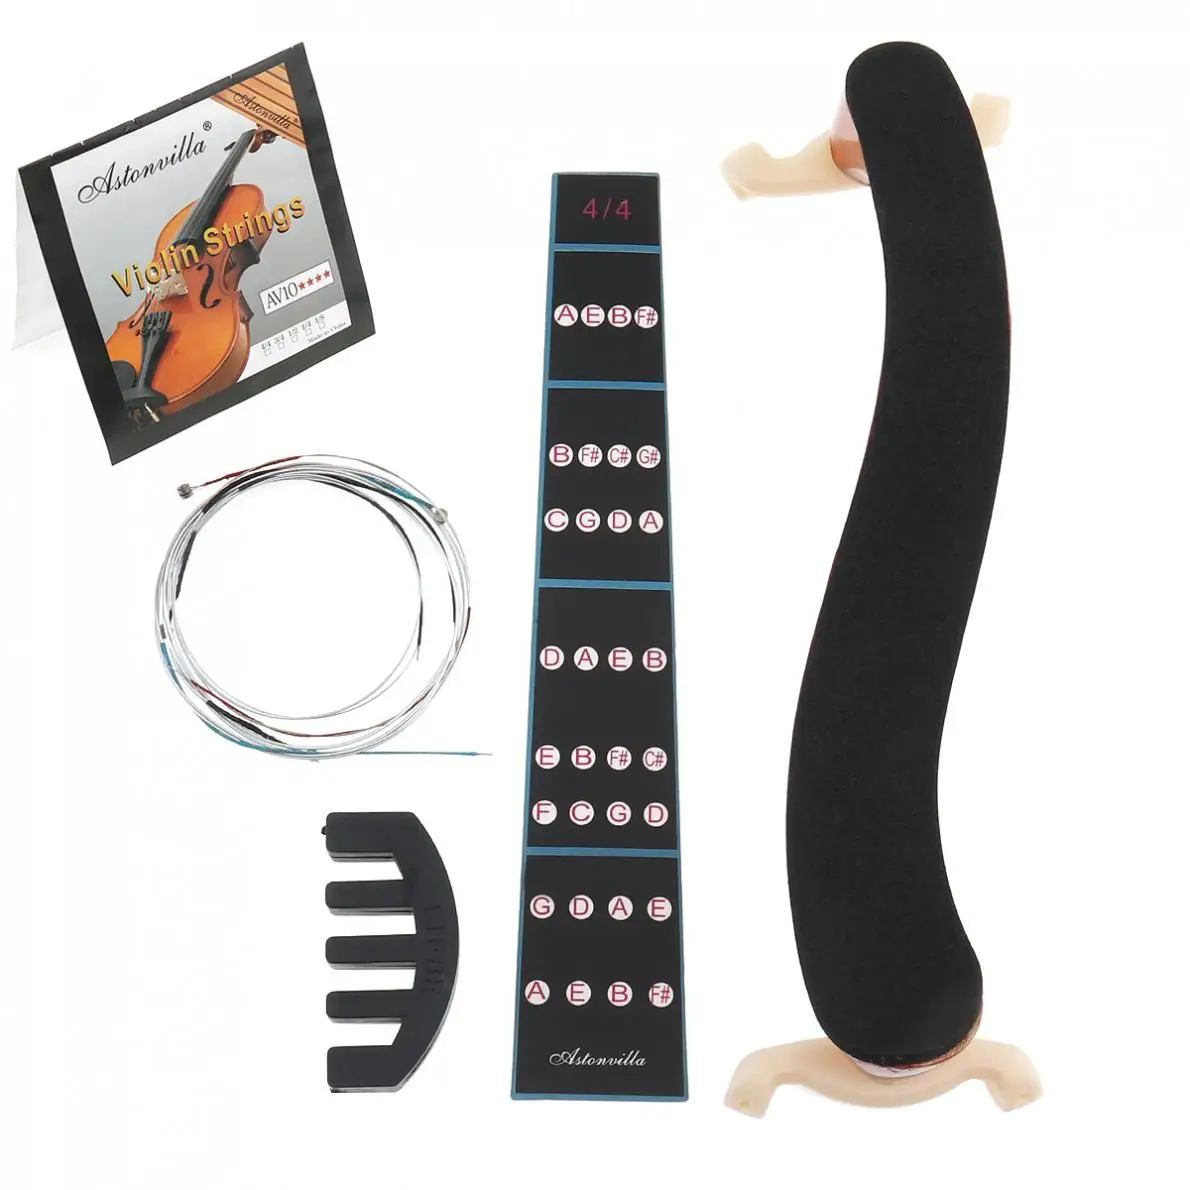 

3/4 & 4/4 Violin Accessories kit with Shoulder Rest Fingerboard Sticker Strings and Mute